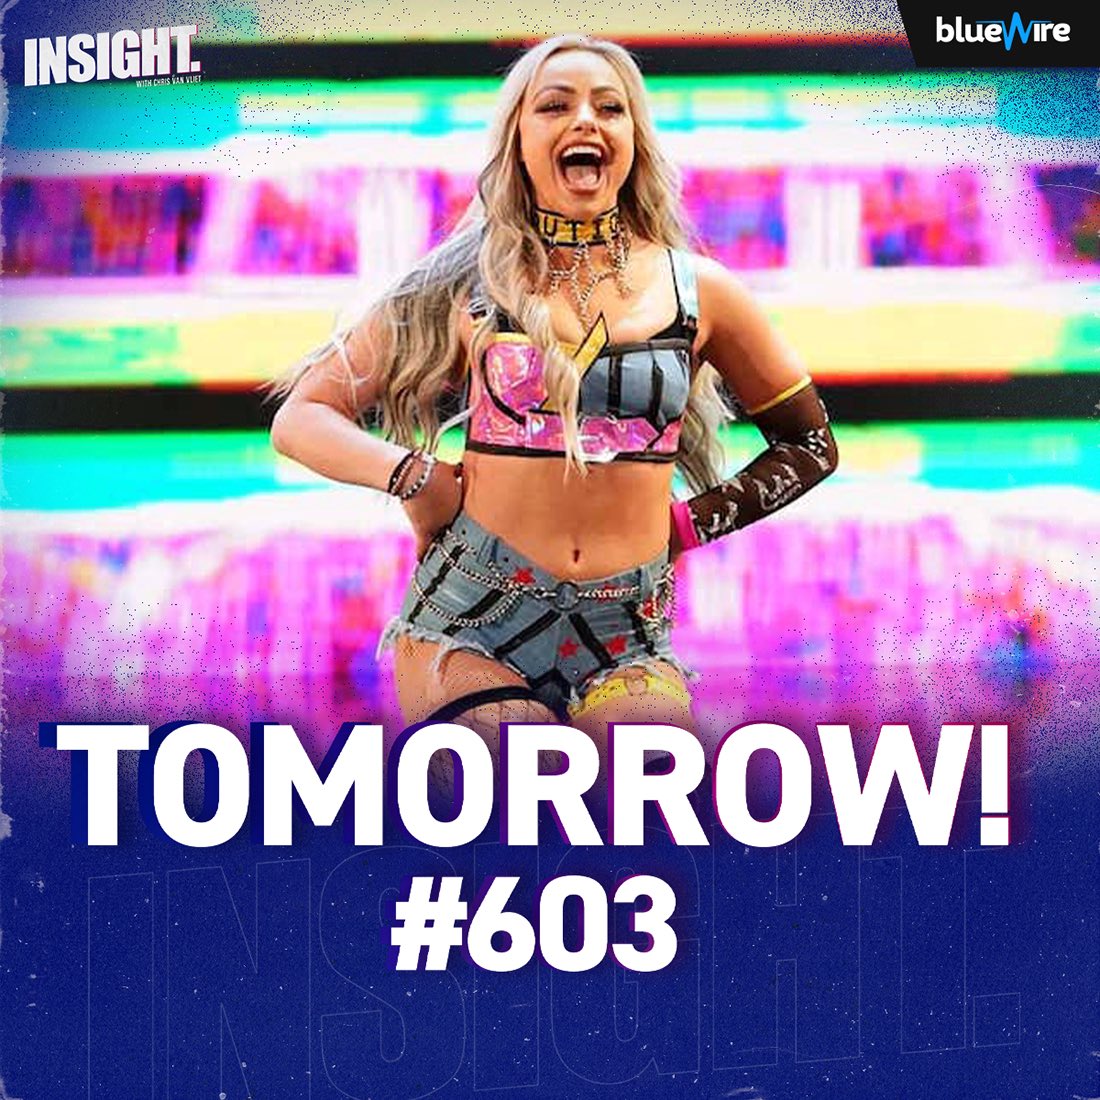 Tomorrow’s guest on Insight: @YaOnlyLivvOnce 🔥